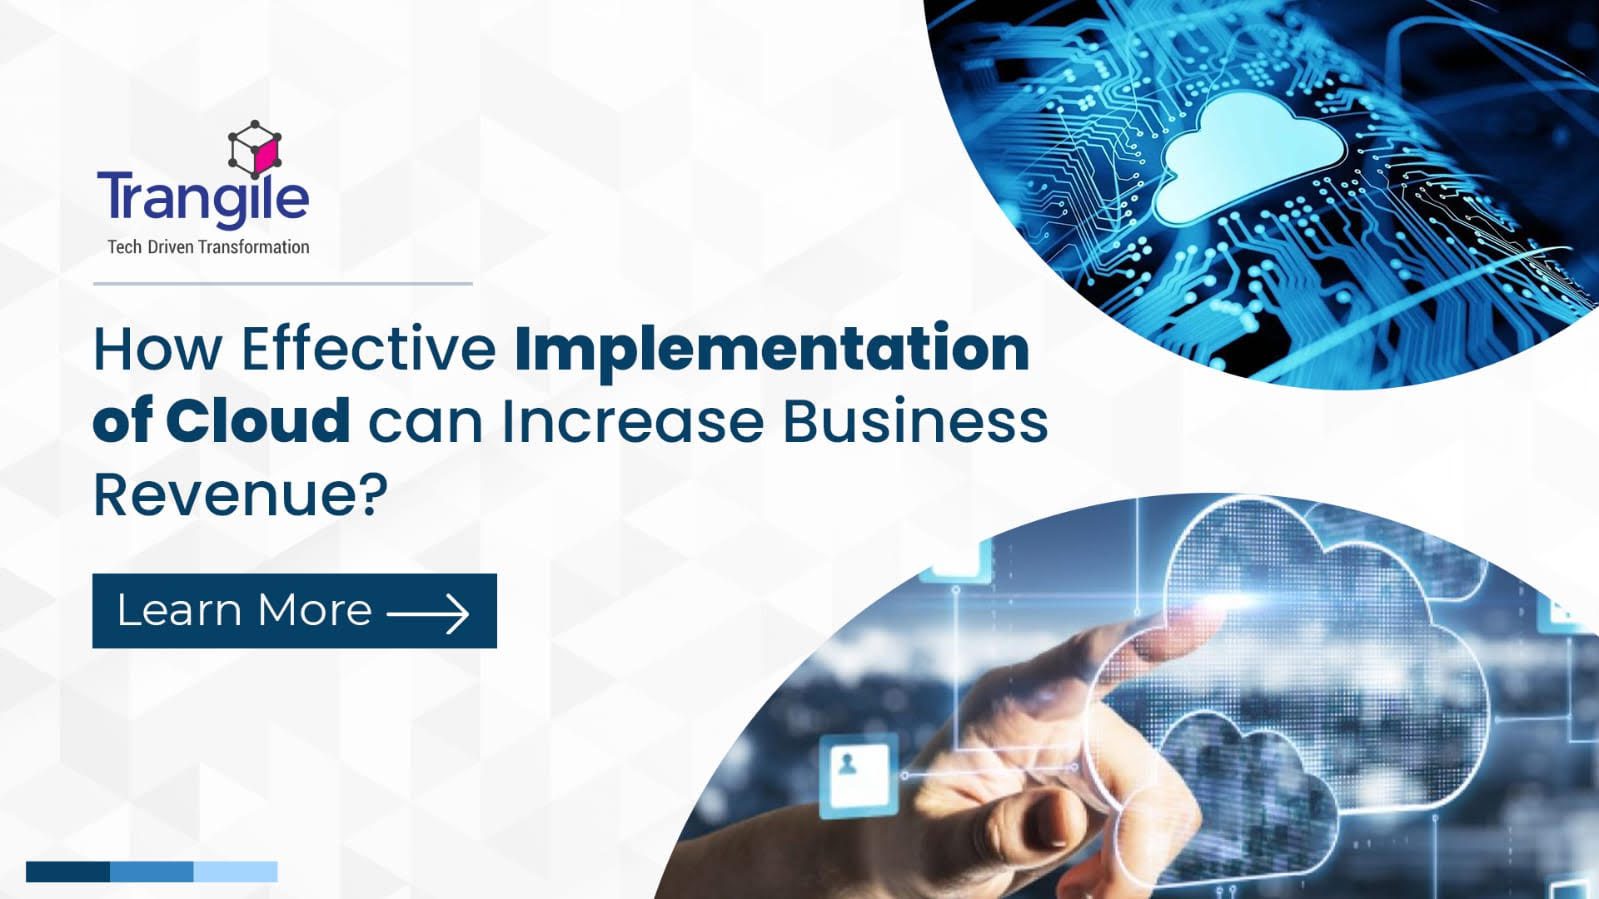 How effective implementation of cloud can increase business revenue?